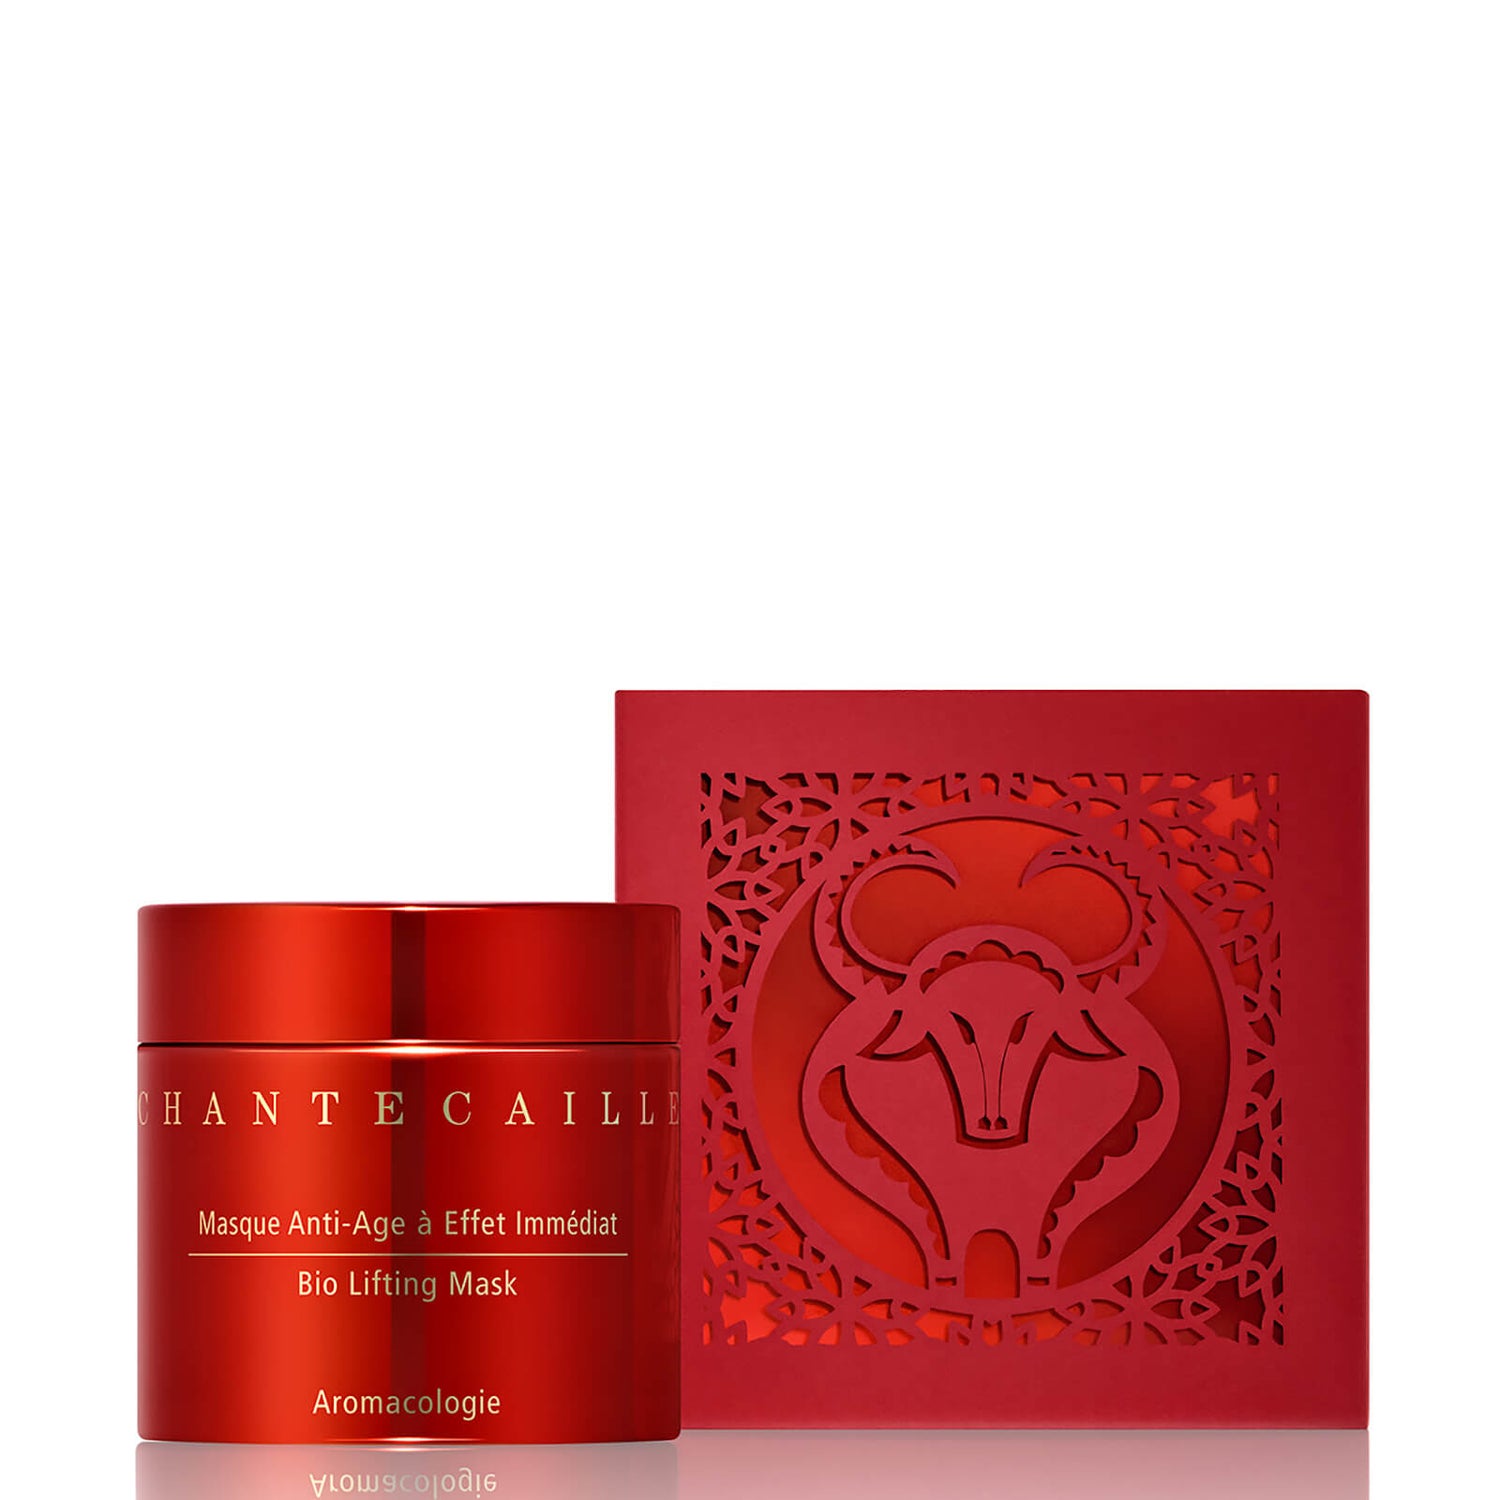 Chantecaille Year of Ox Bio Lifting Mask 75ml - Supersize (Worth £222.00)